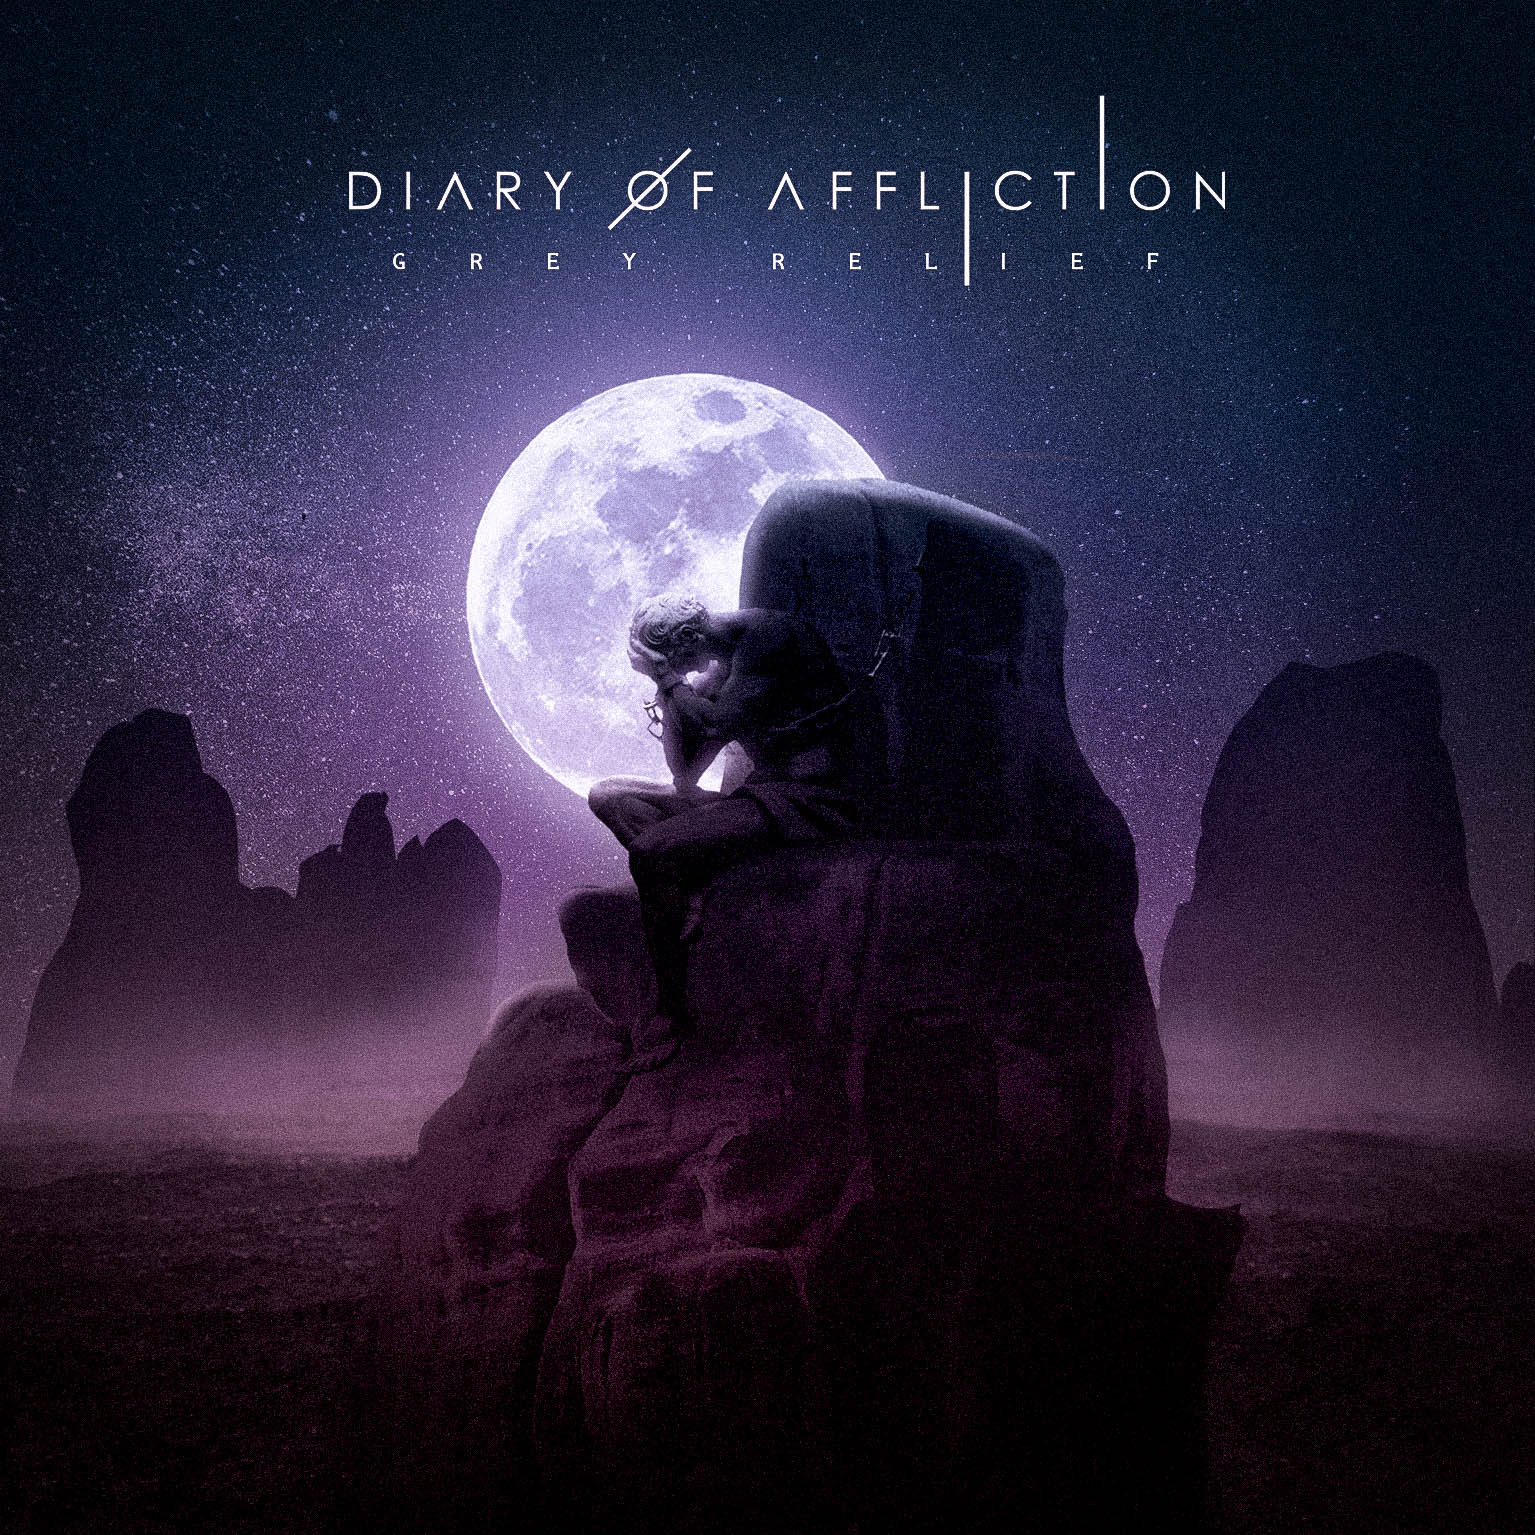 Release “Grey Relief” by Diary of Affliction - MusicBrainz